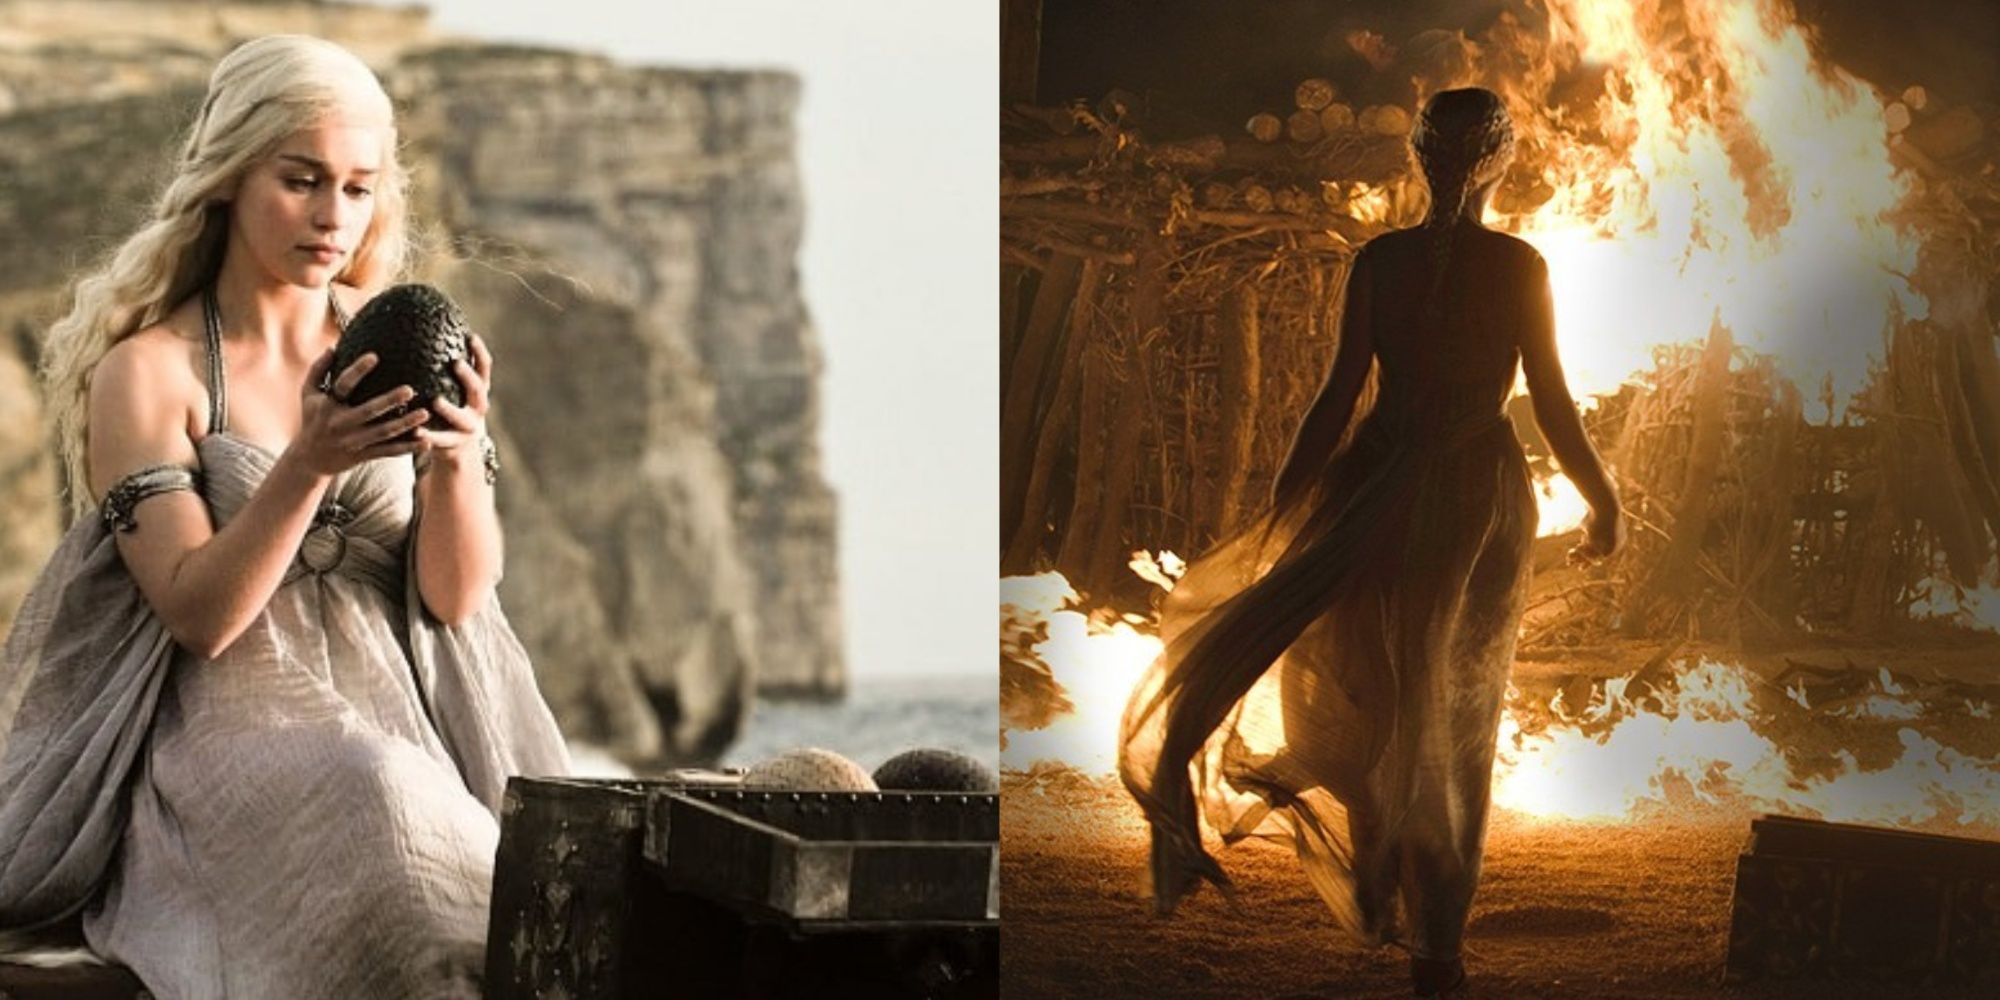 Split image of Daenerys Targaryen with dragon eggs and Daenerys standing in front of Khal Drogo's funeral pyre in Game of Thrones. 